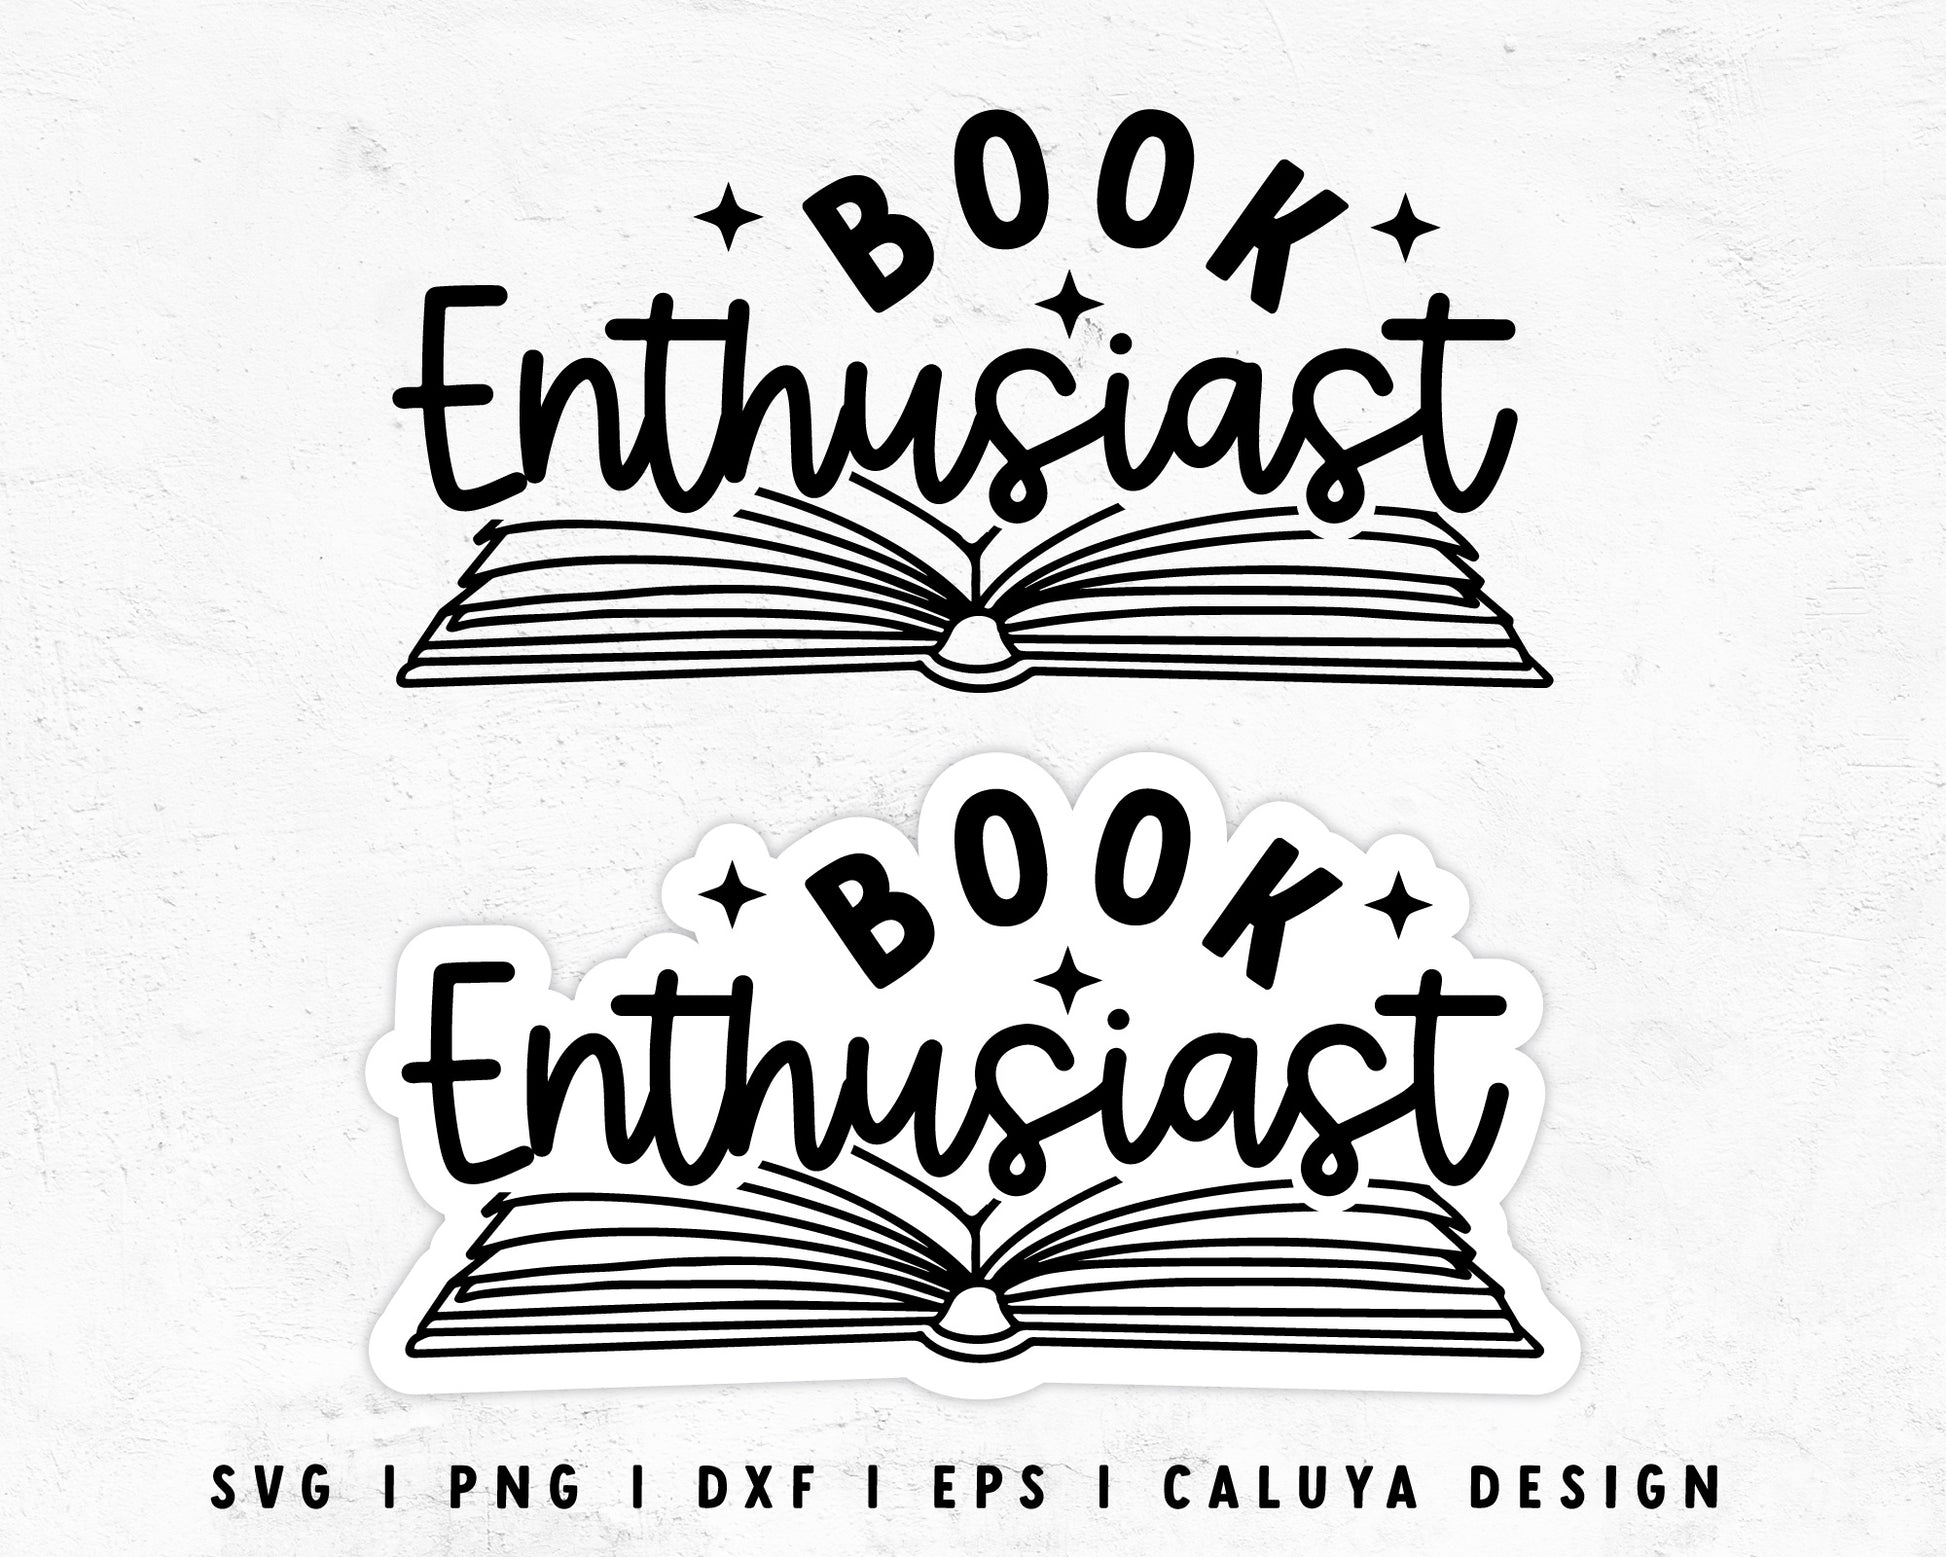 FREE Book Enthusiast SVG | Book Lover SVG Cut File for Cricut, Cameo Silhouette | Free SVG Cut File